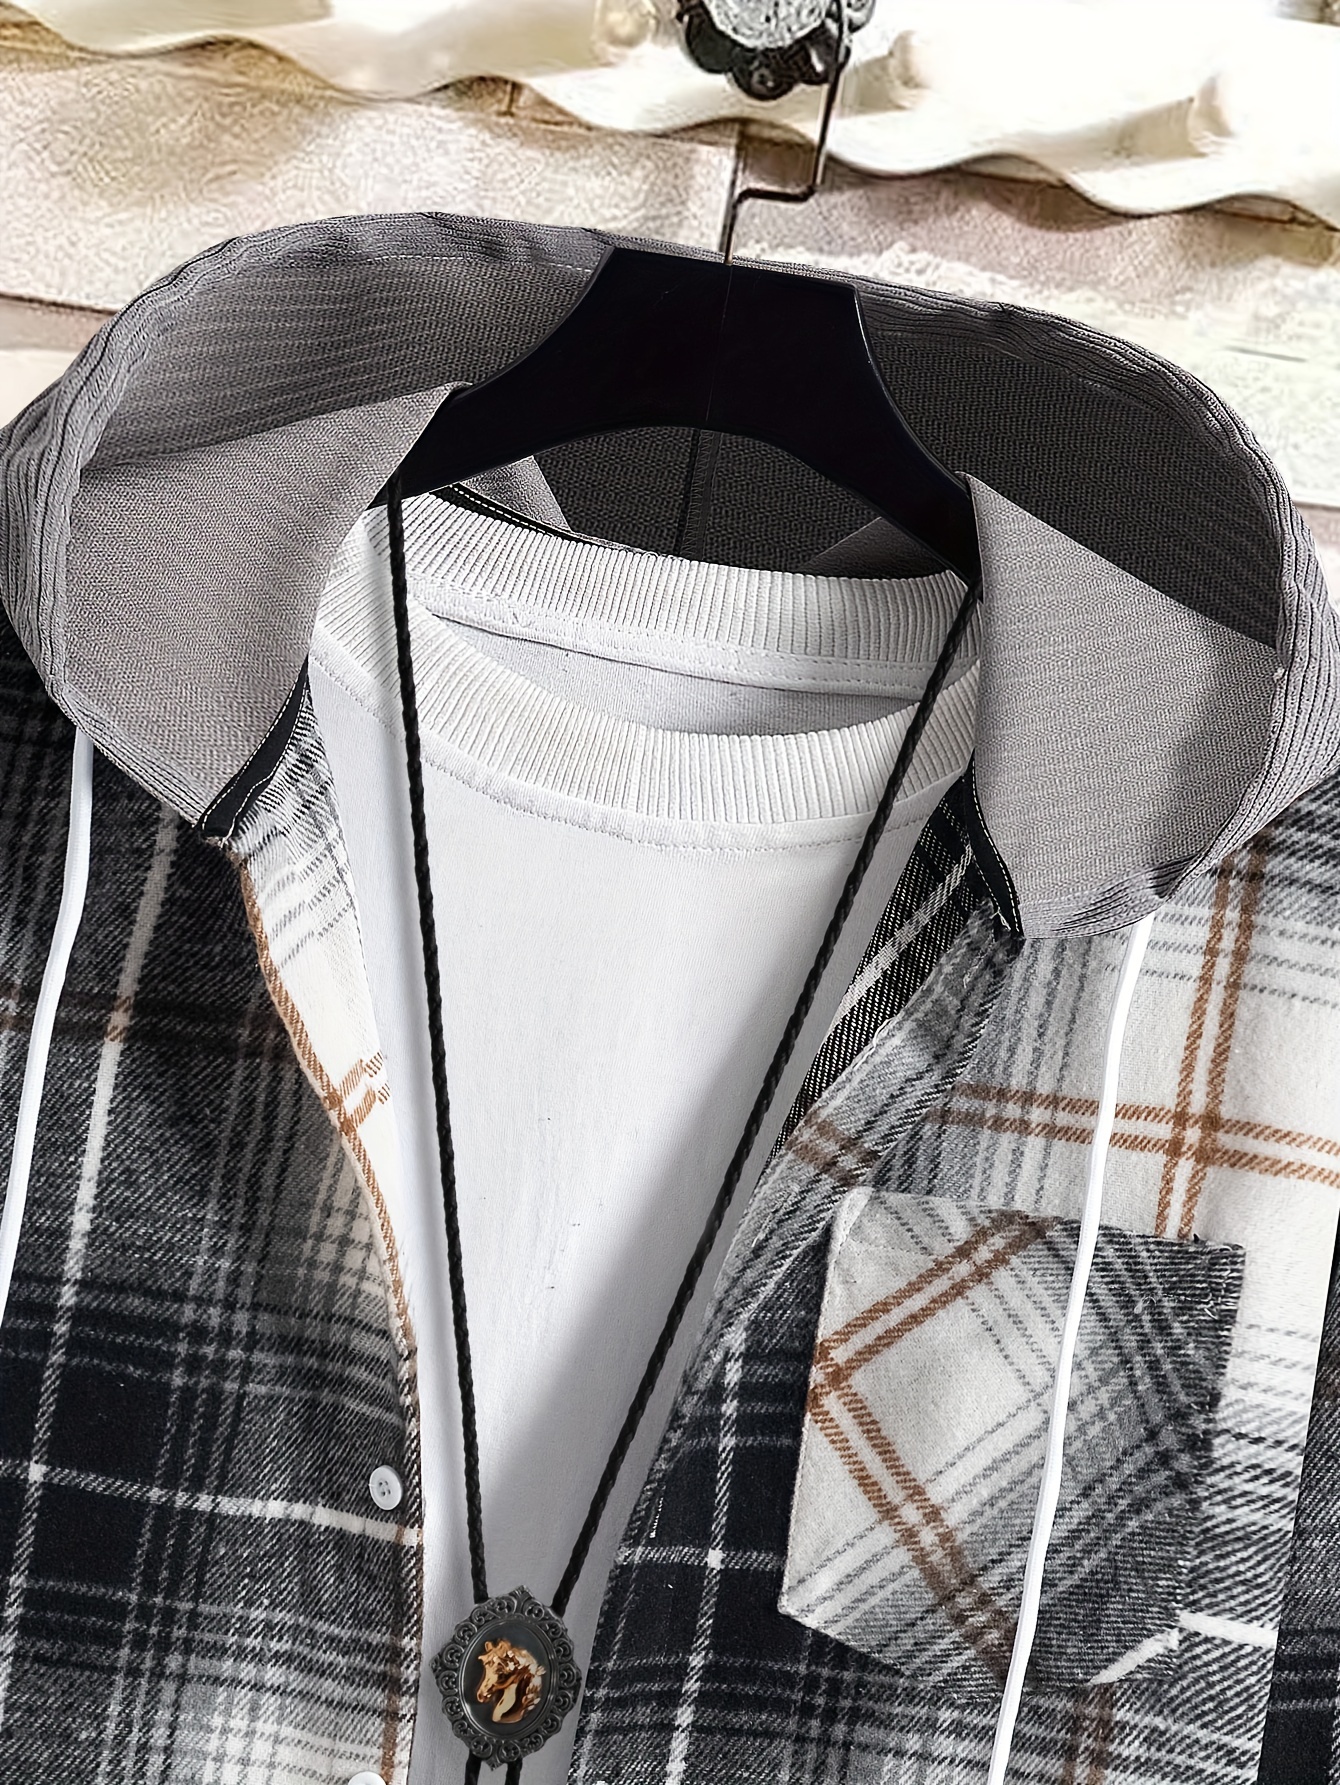 Plaid Shirt Coat For Men Long Sleeve Hoodies Casual Regular Fit Button Up  Hooded Shirts Jacket